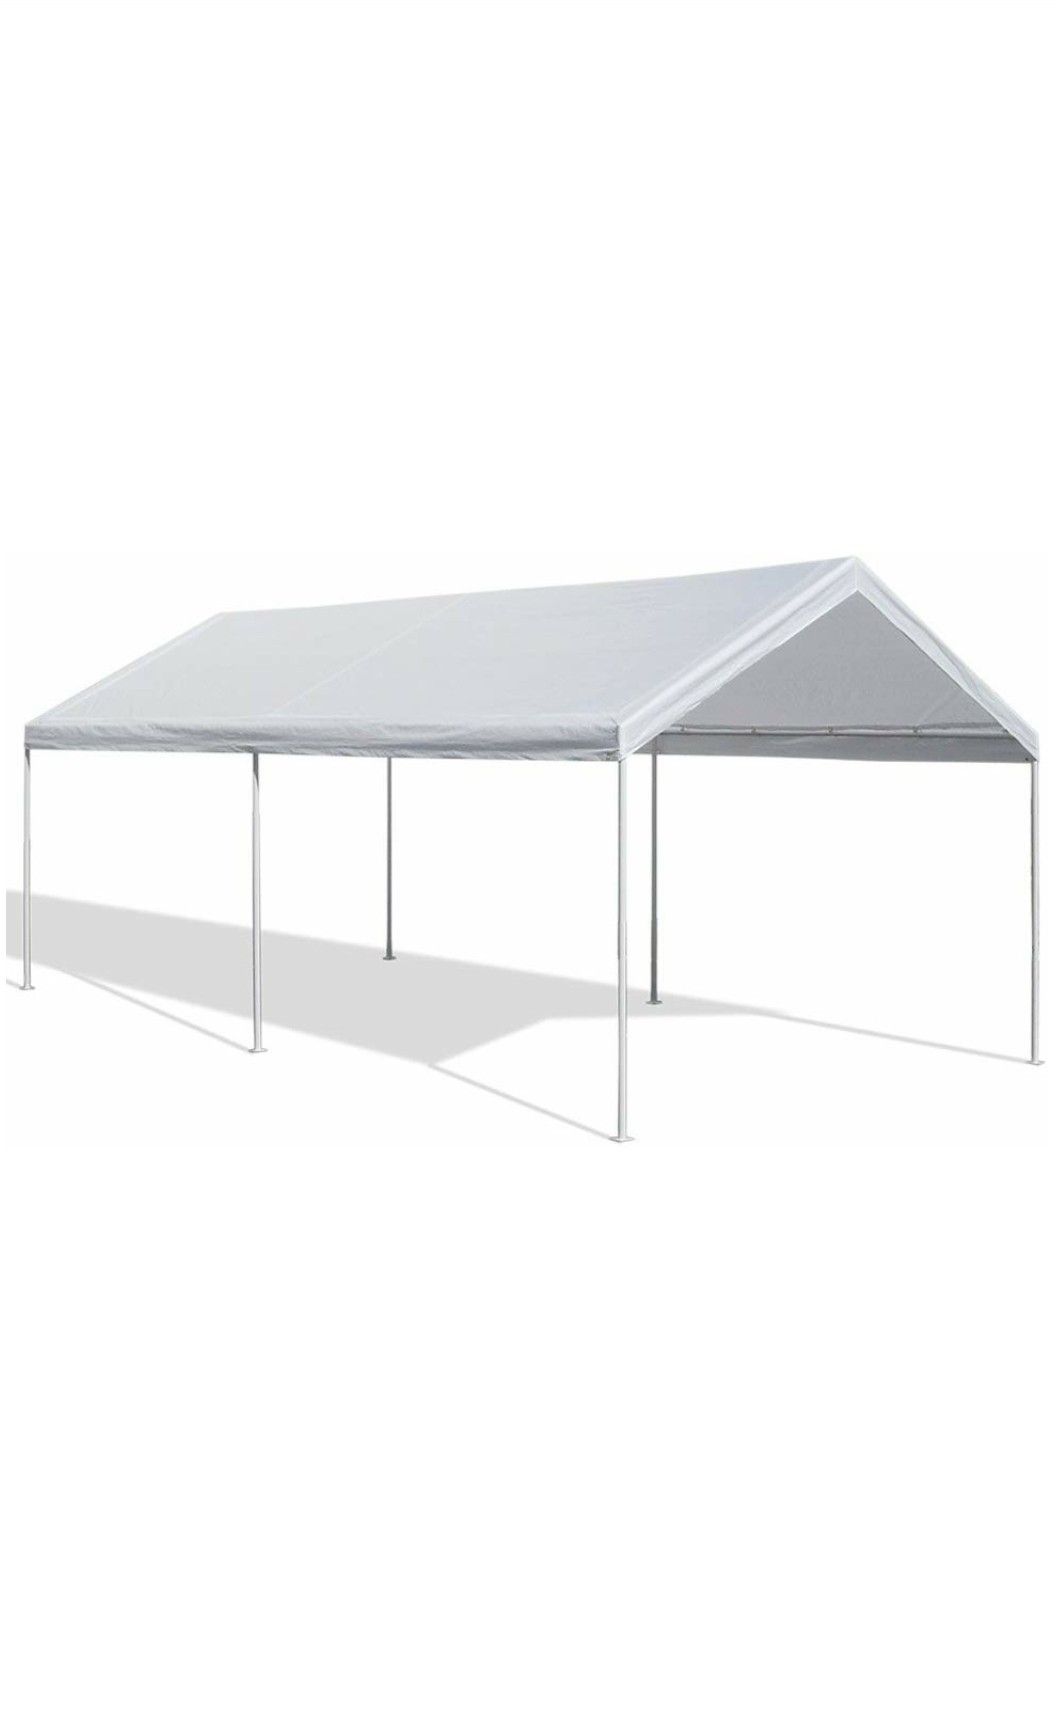 Canopy 10x20 Feet Heavy Duty Easy to install Shed Carport Tent Garage new